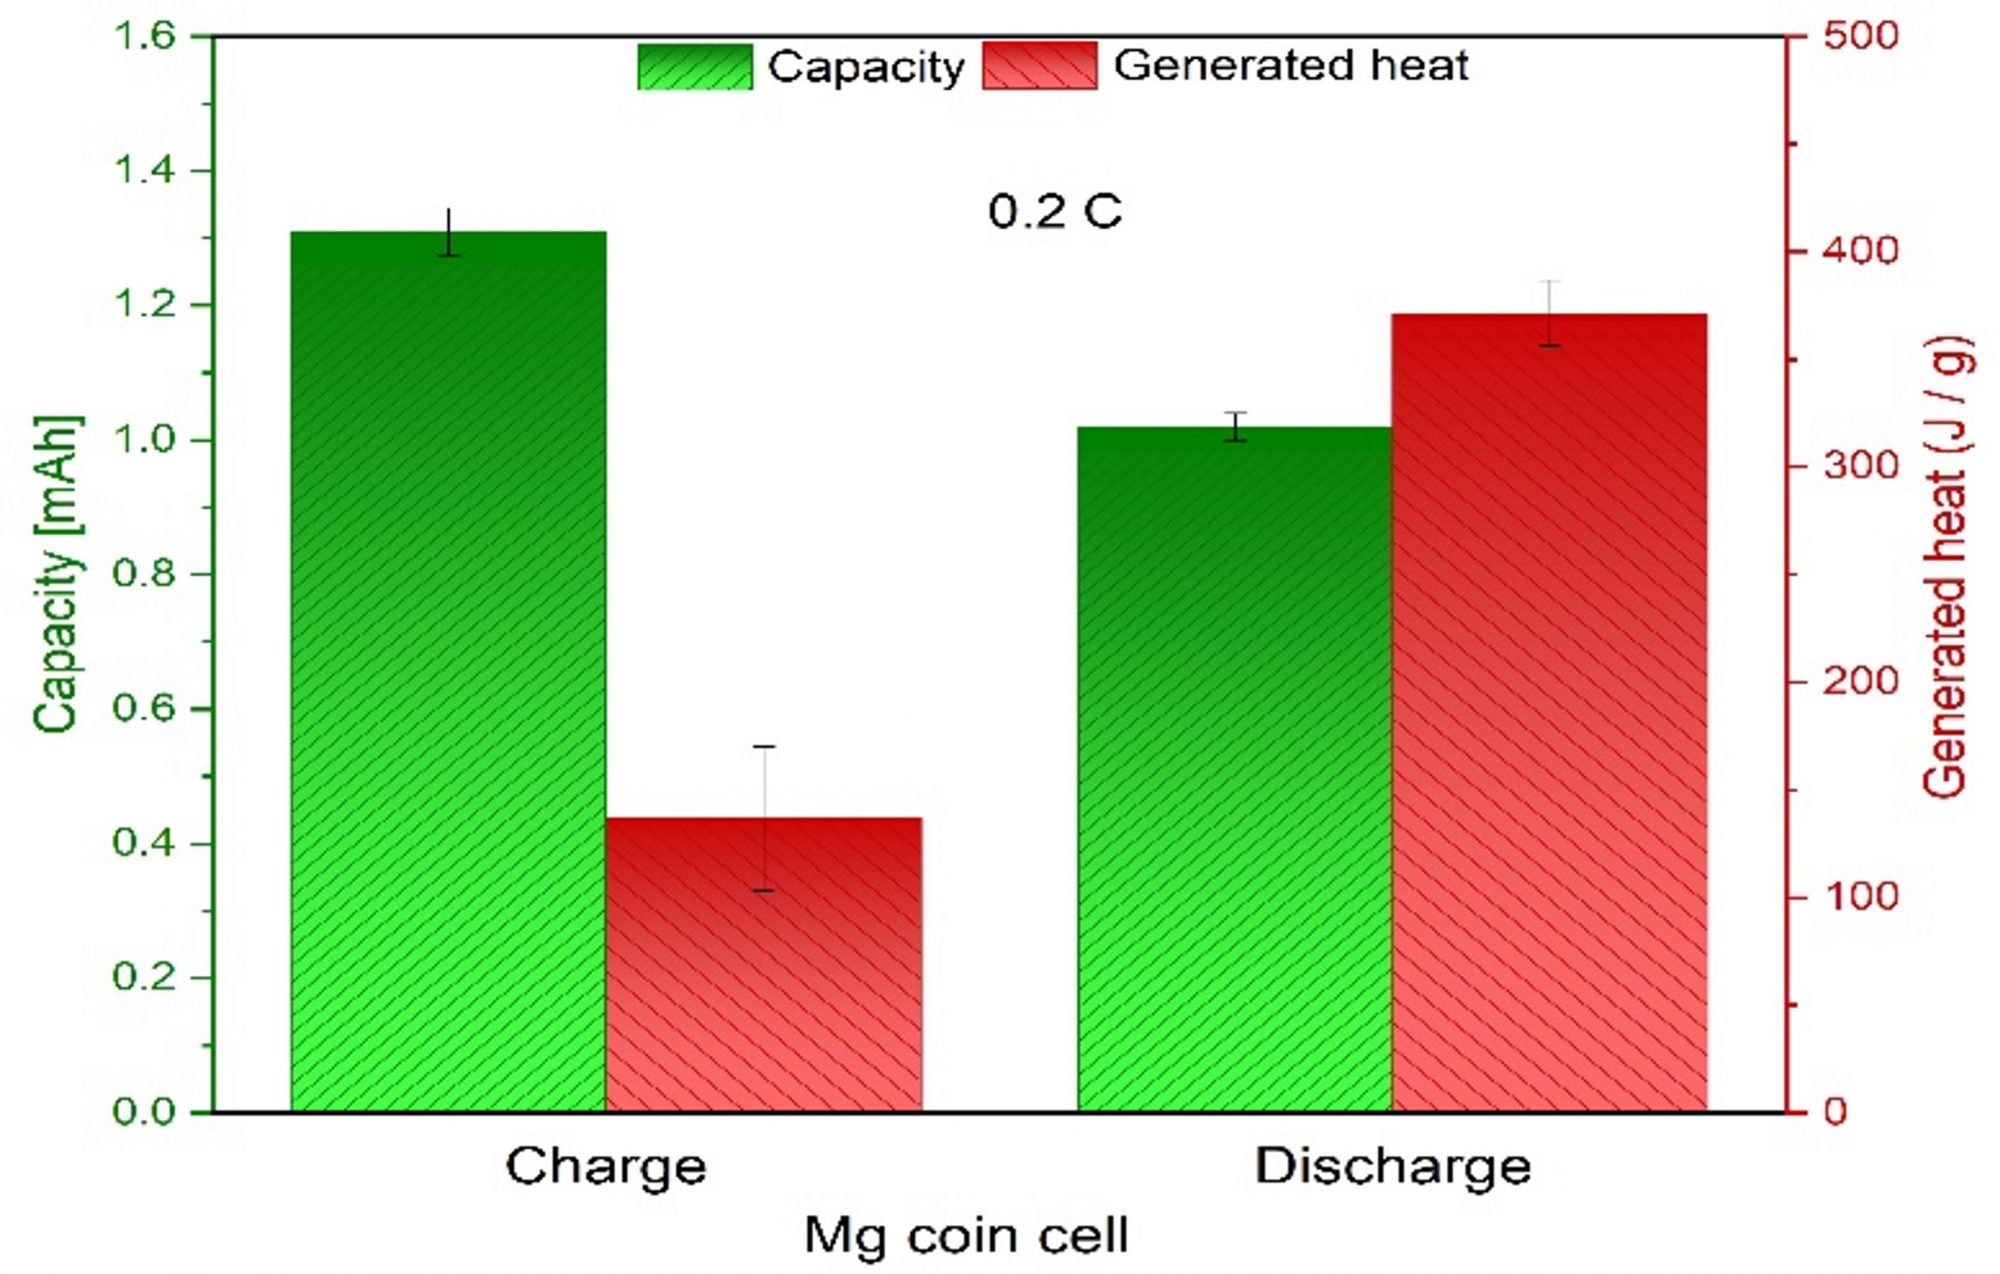 Figure 3: Capacity and generated heat of Mg coin cells at 0.2 C charge/discharge rate.